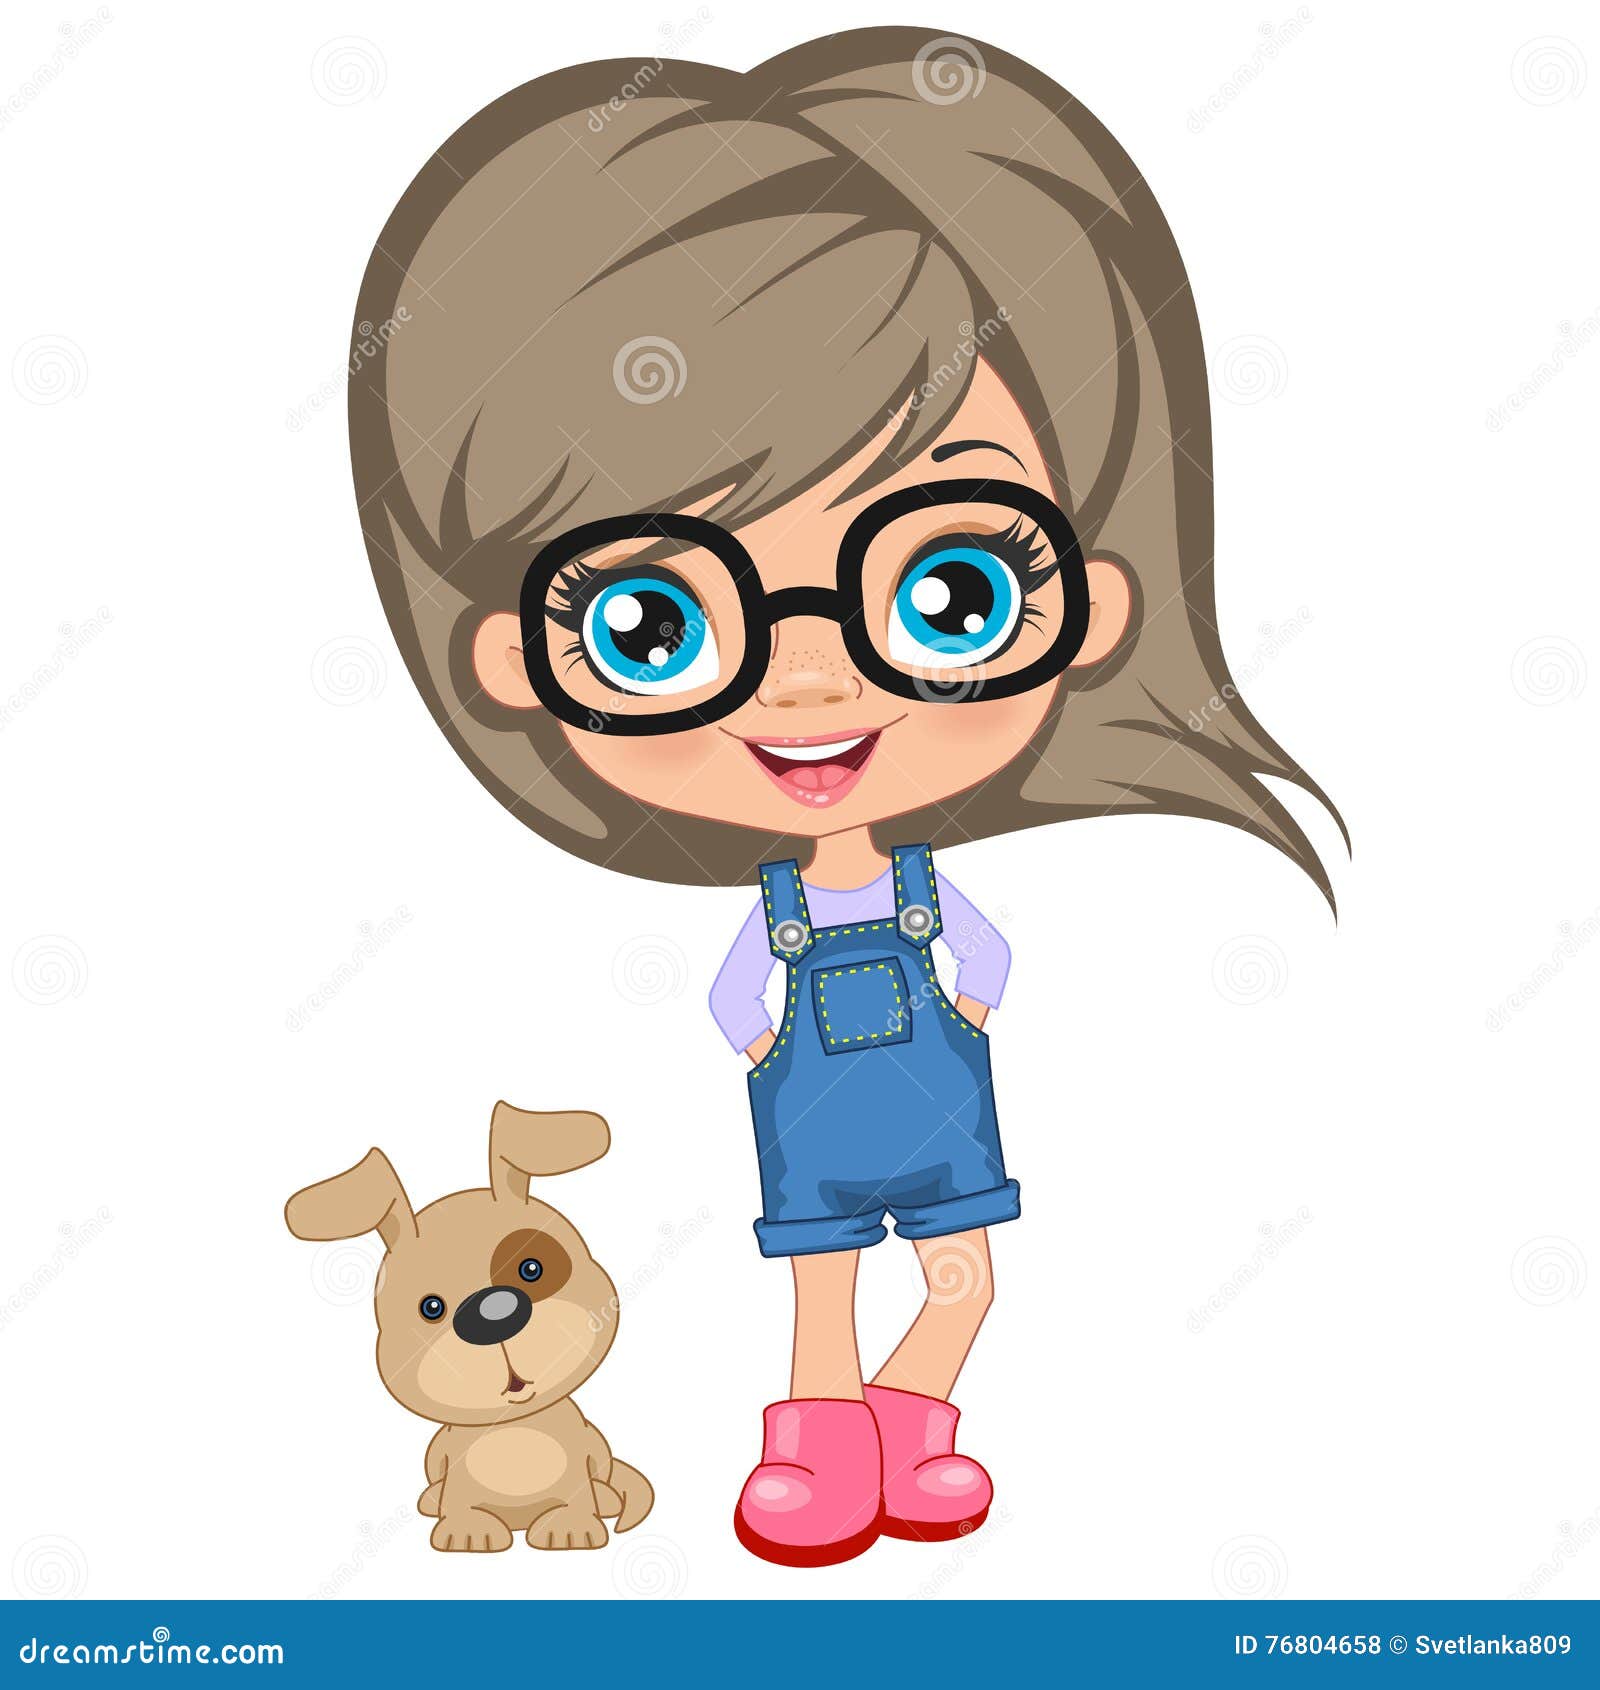 clipart girl with glasses - photo #13